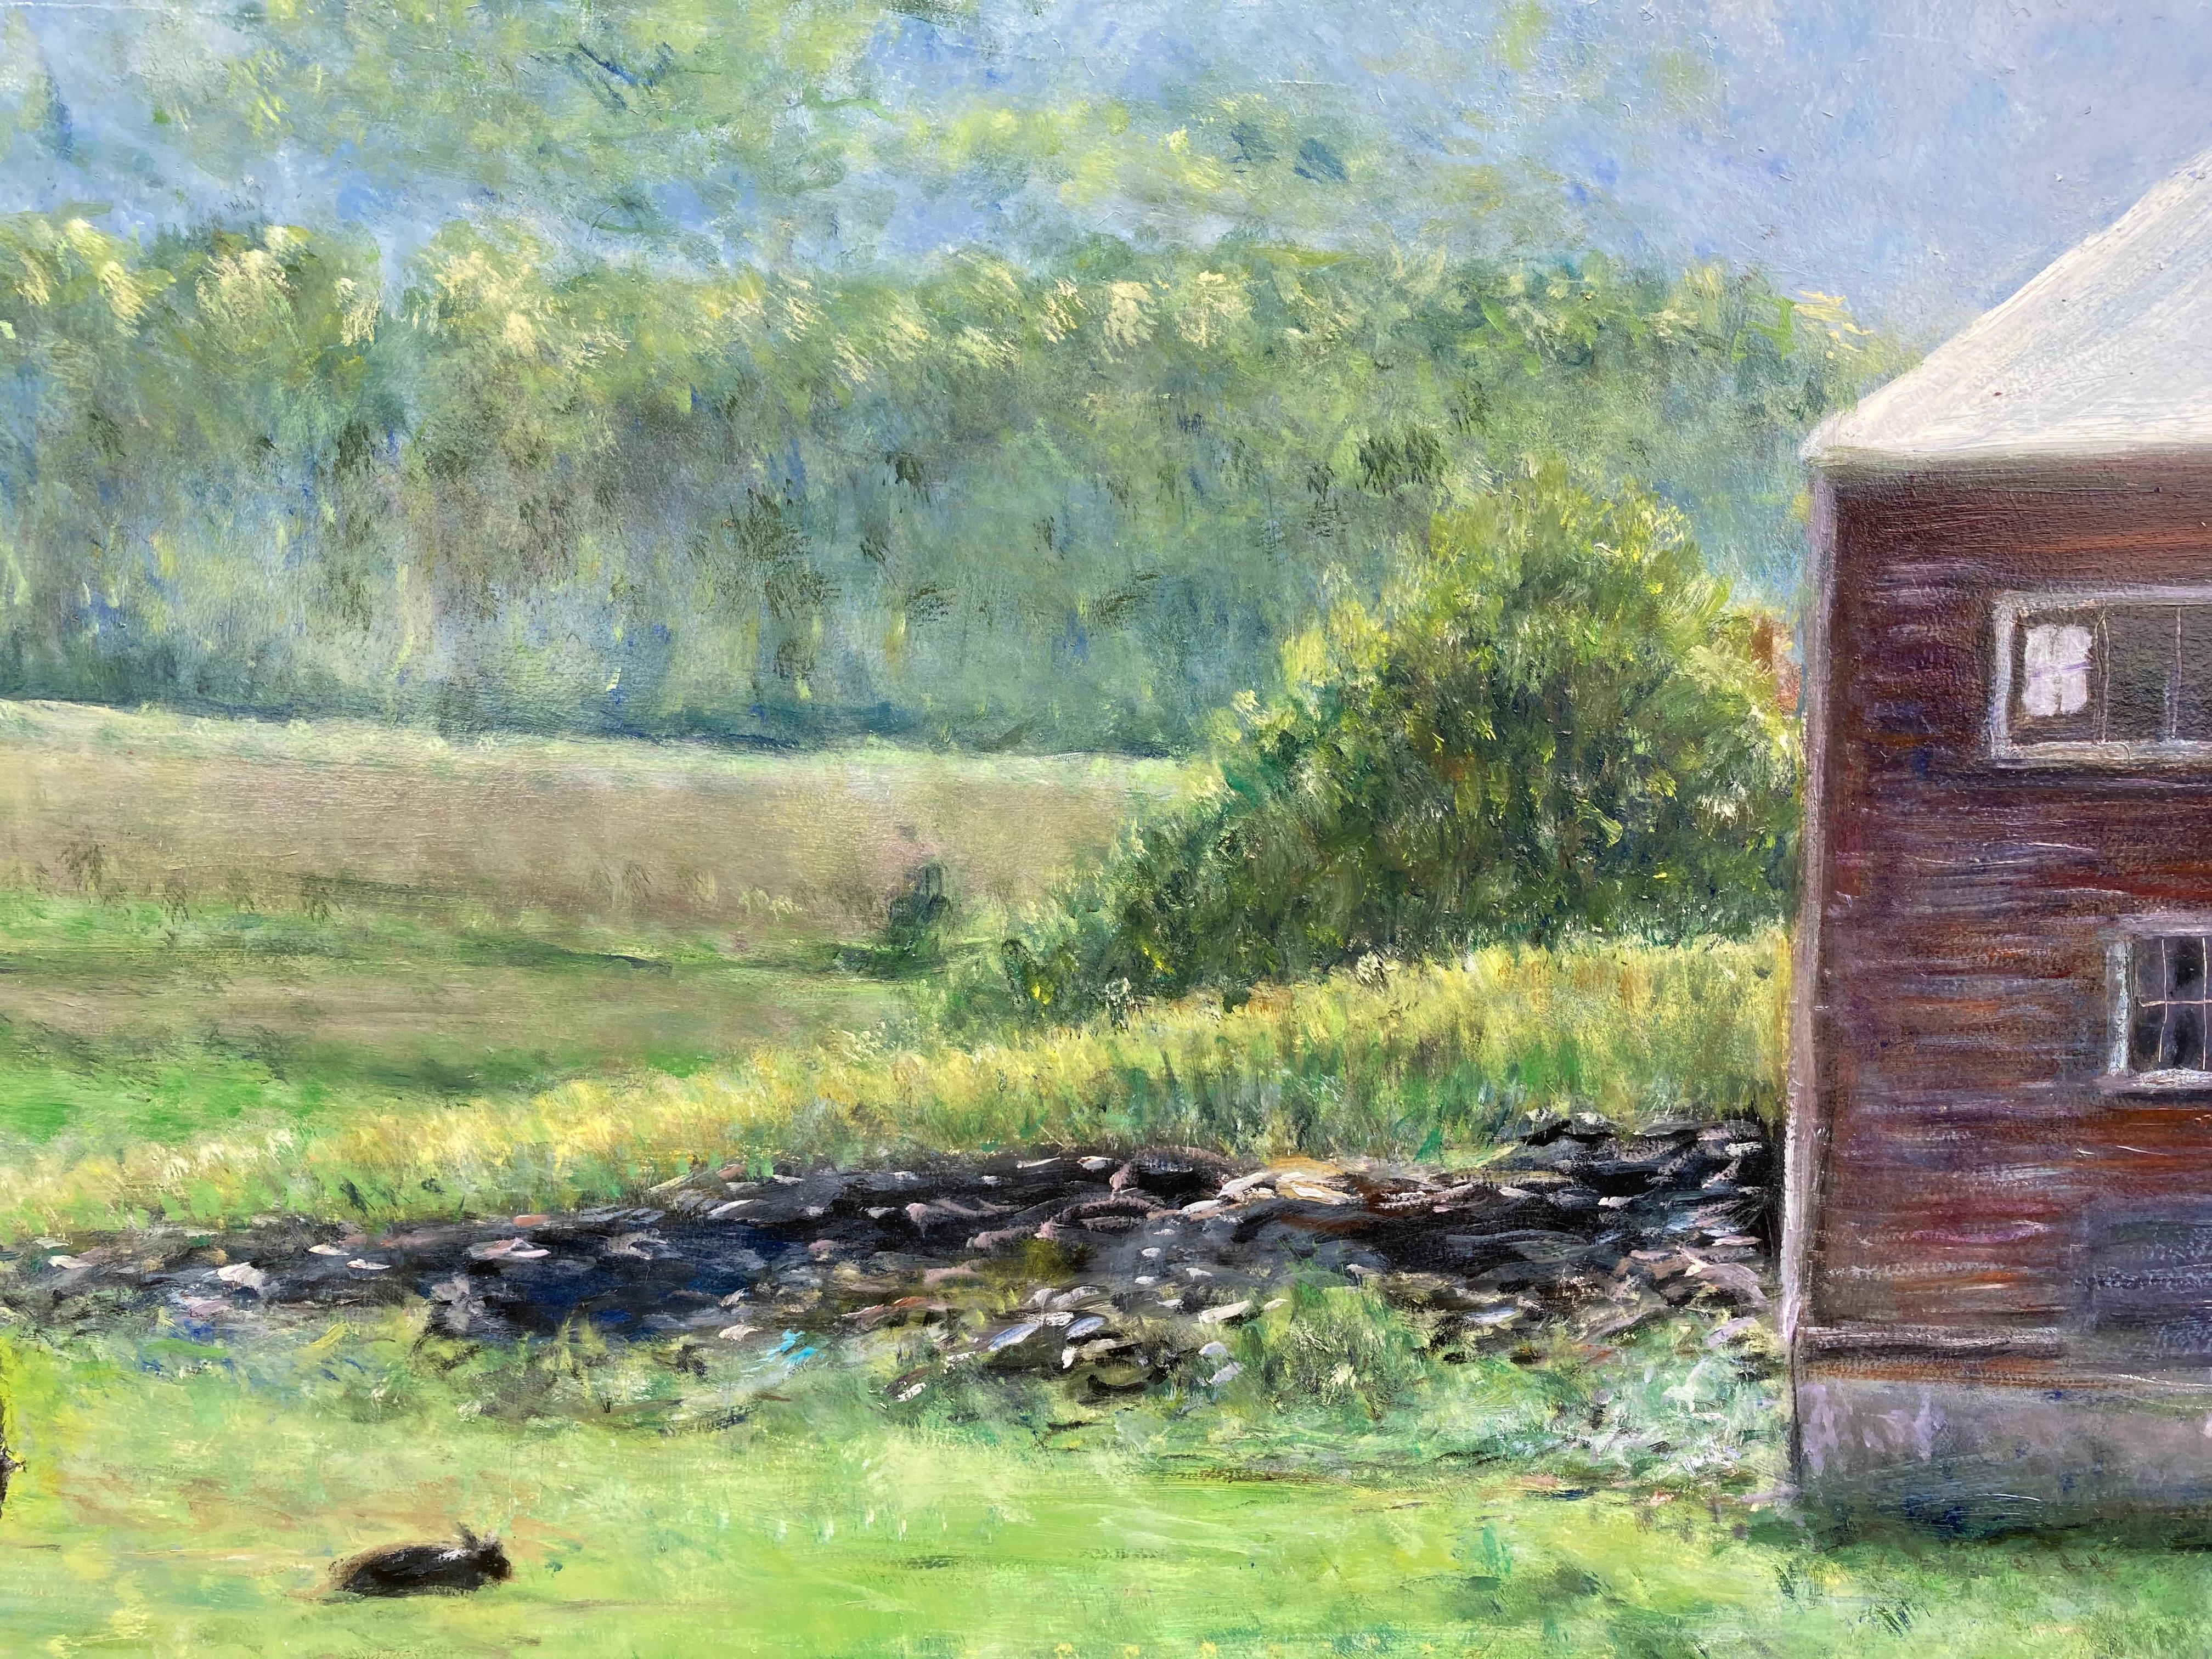 Farm on Route 5, Vermont - Impressionist Painting by Herbert Hertsen